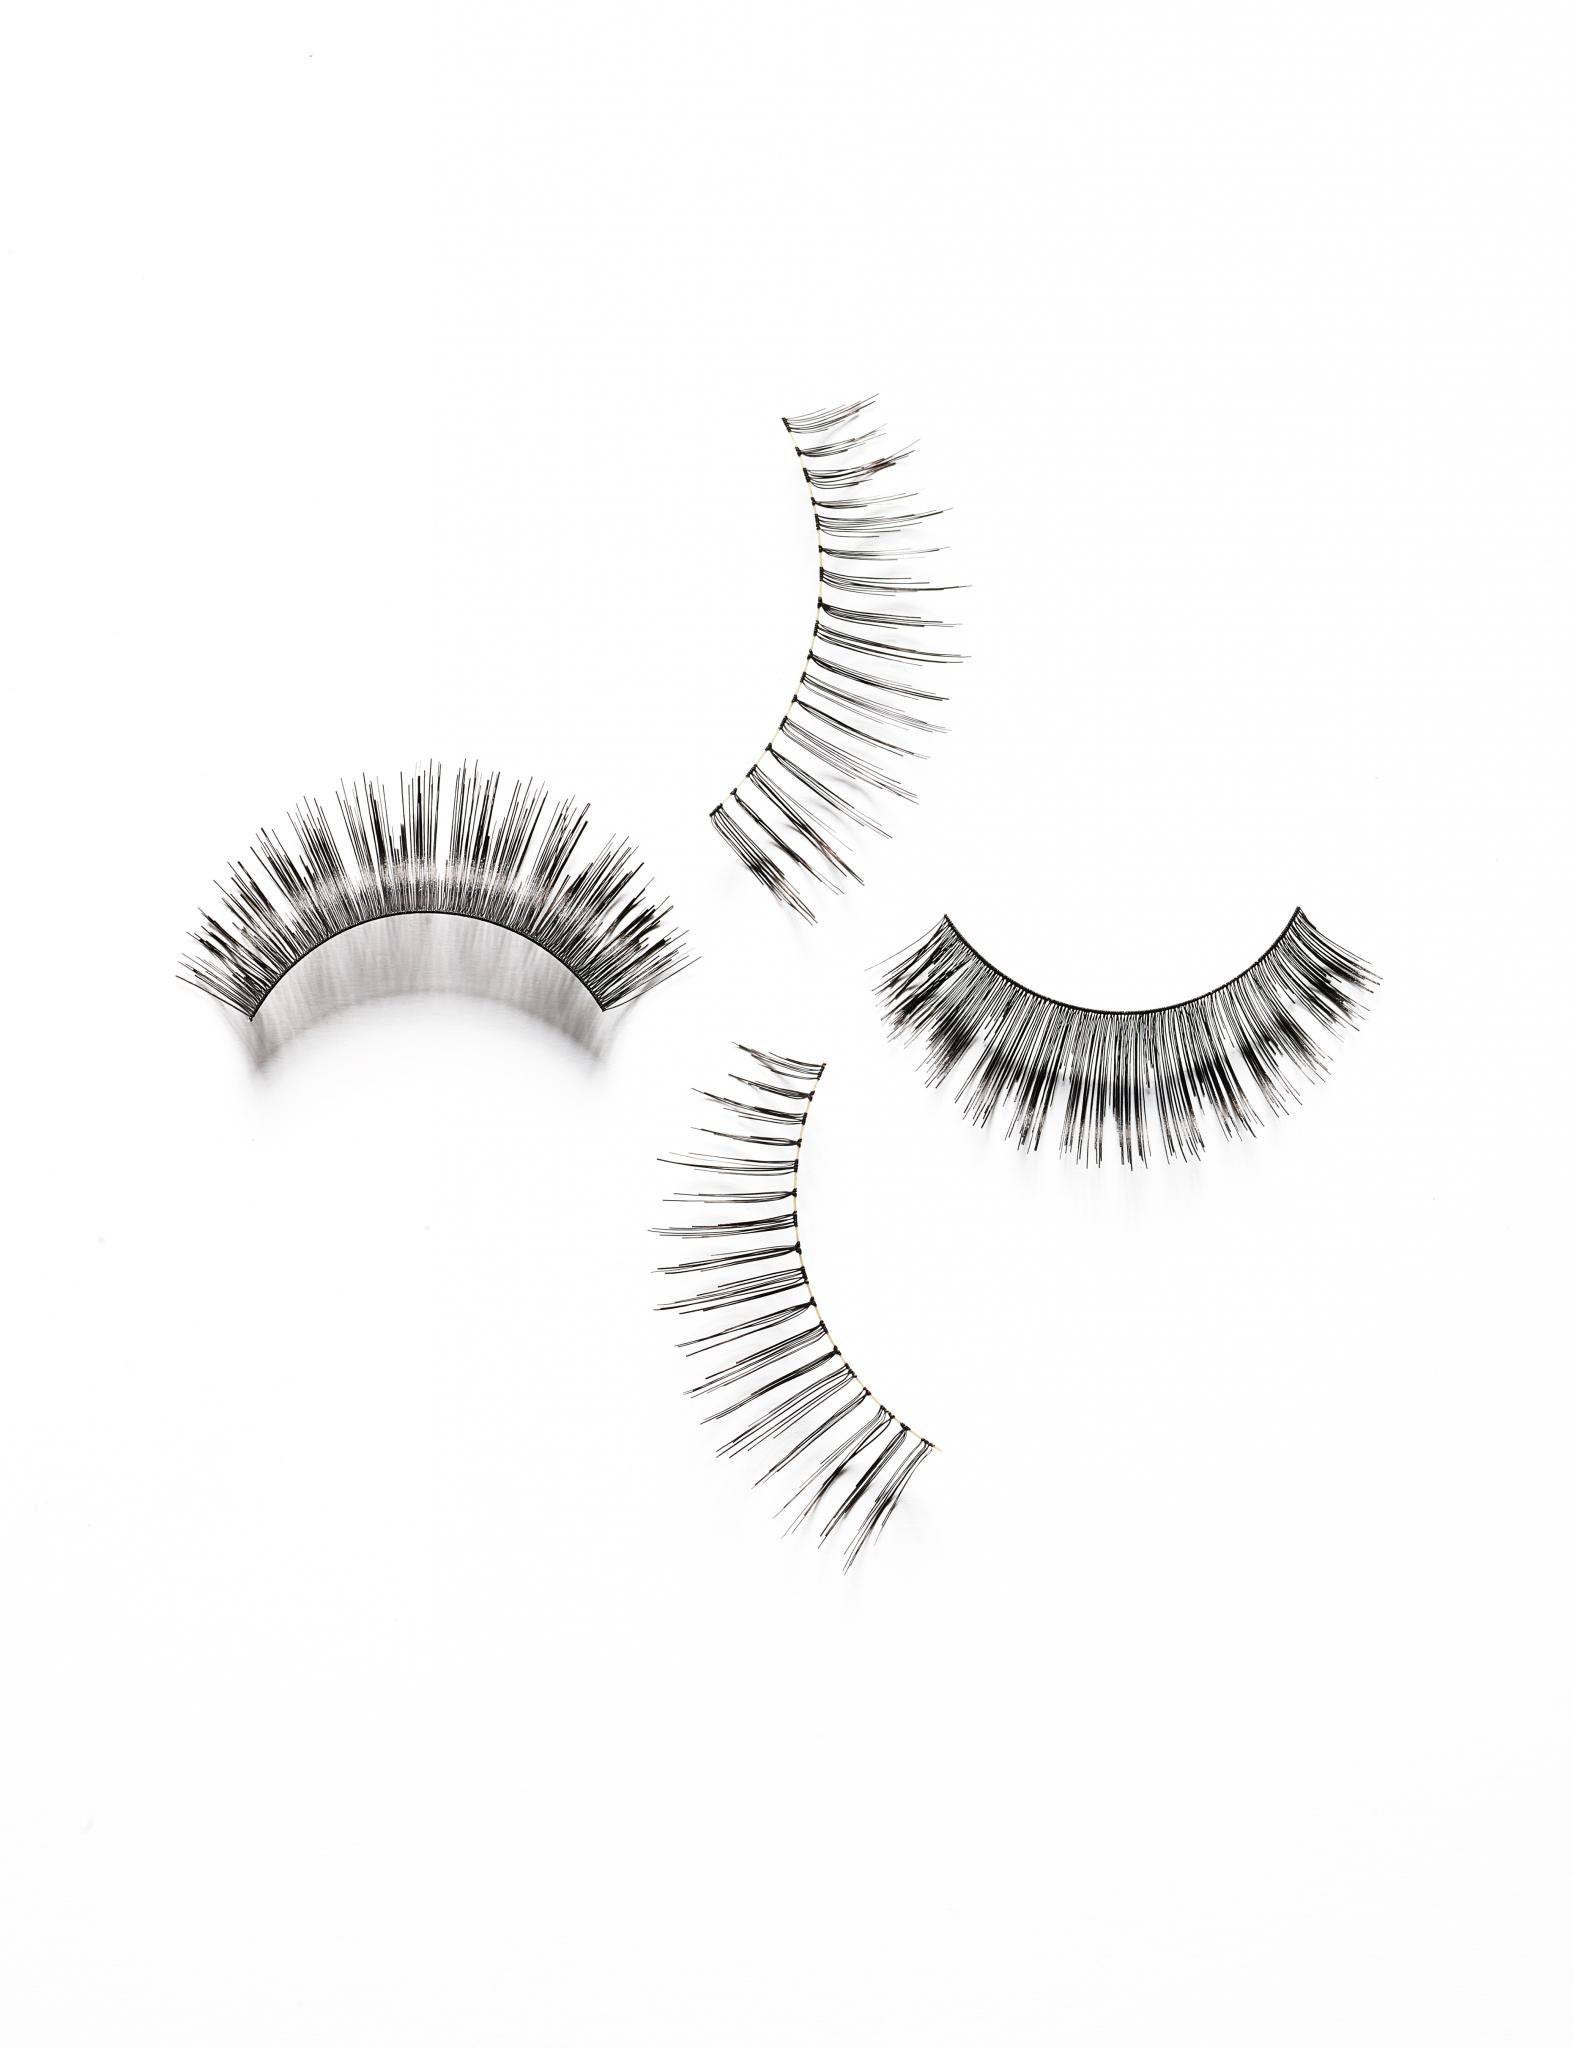 Afrobella on The Parallel Between Fake Eyelashes and Weaves